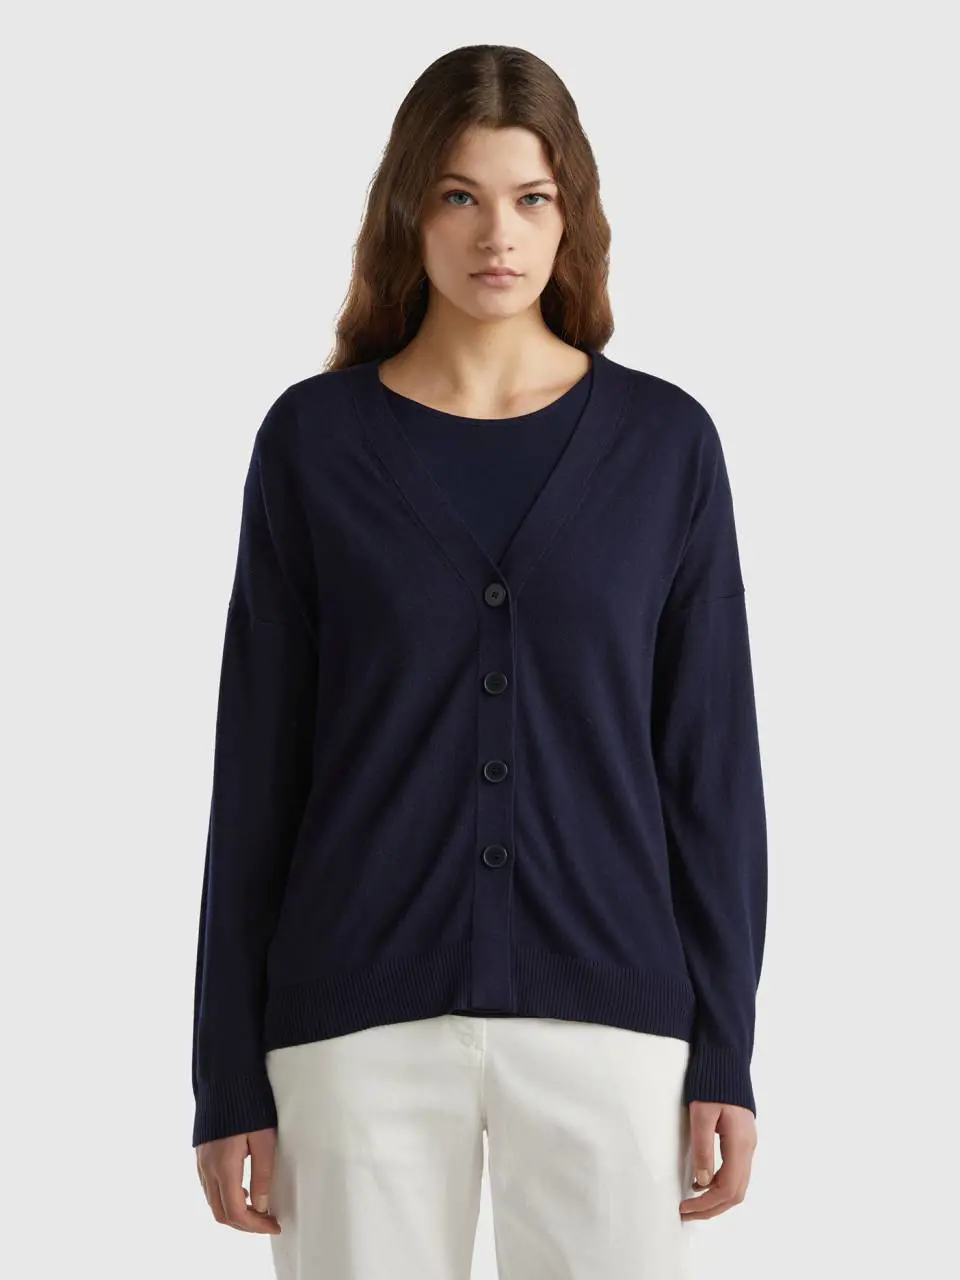 Benetton cotton and modal® blend cardigan. 1